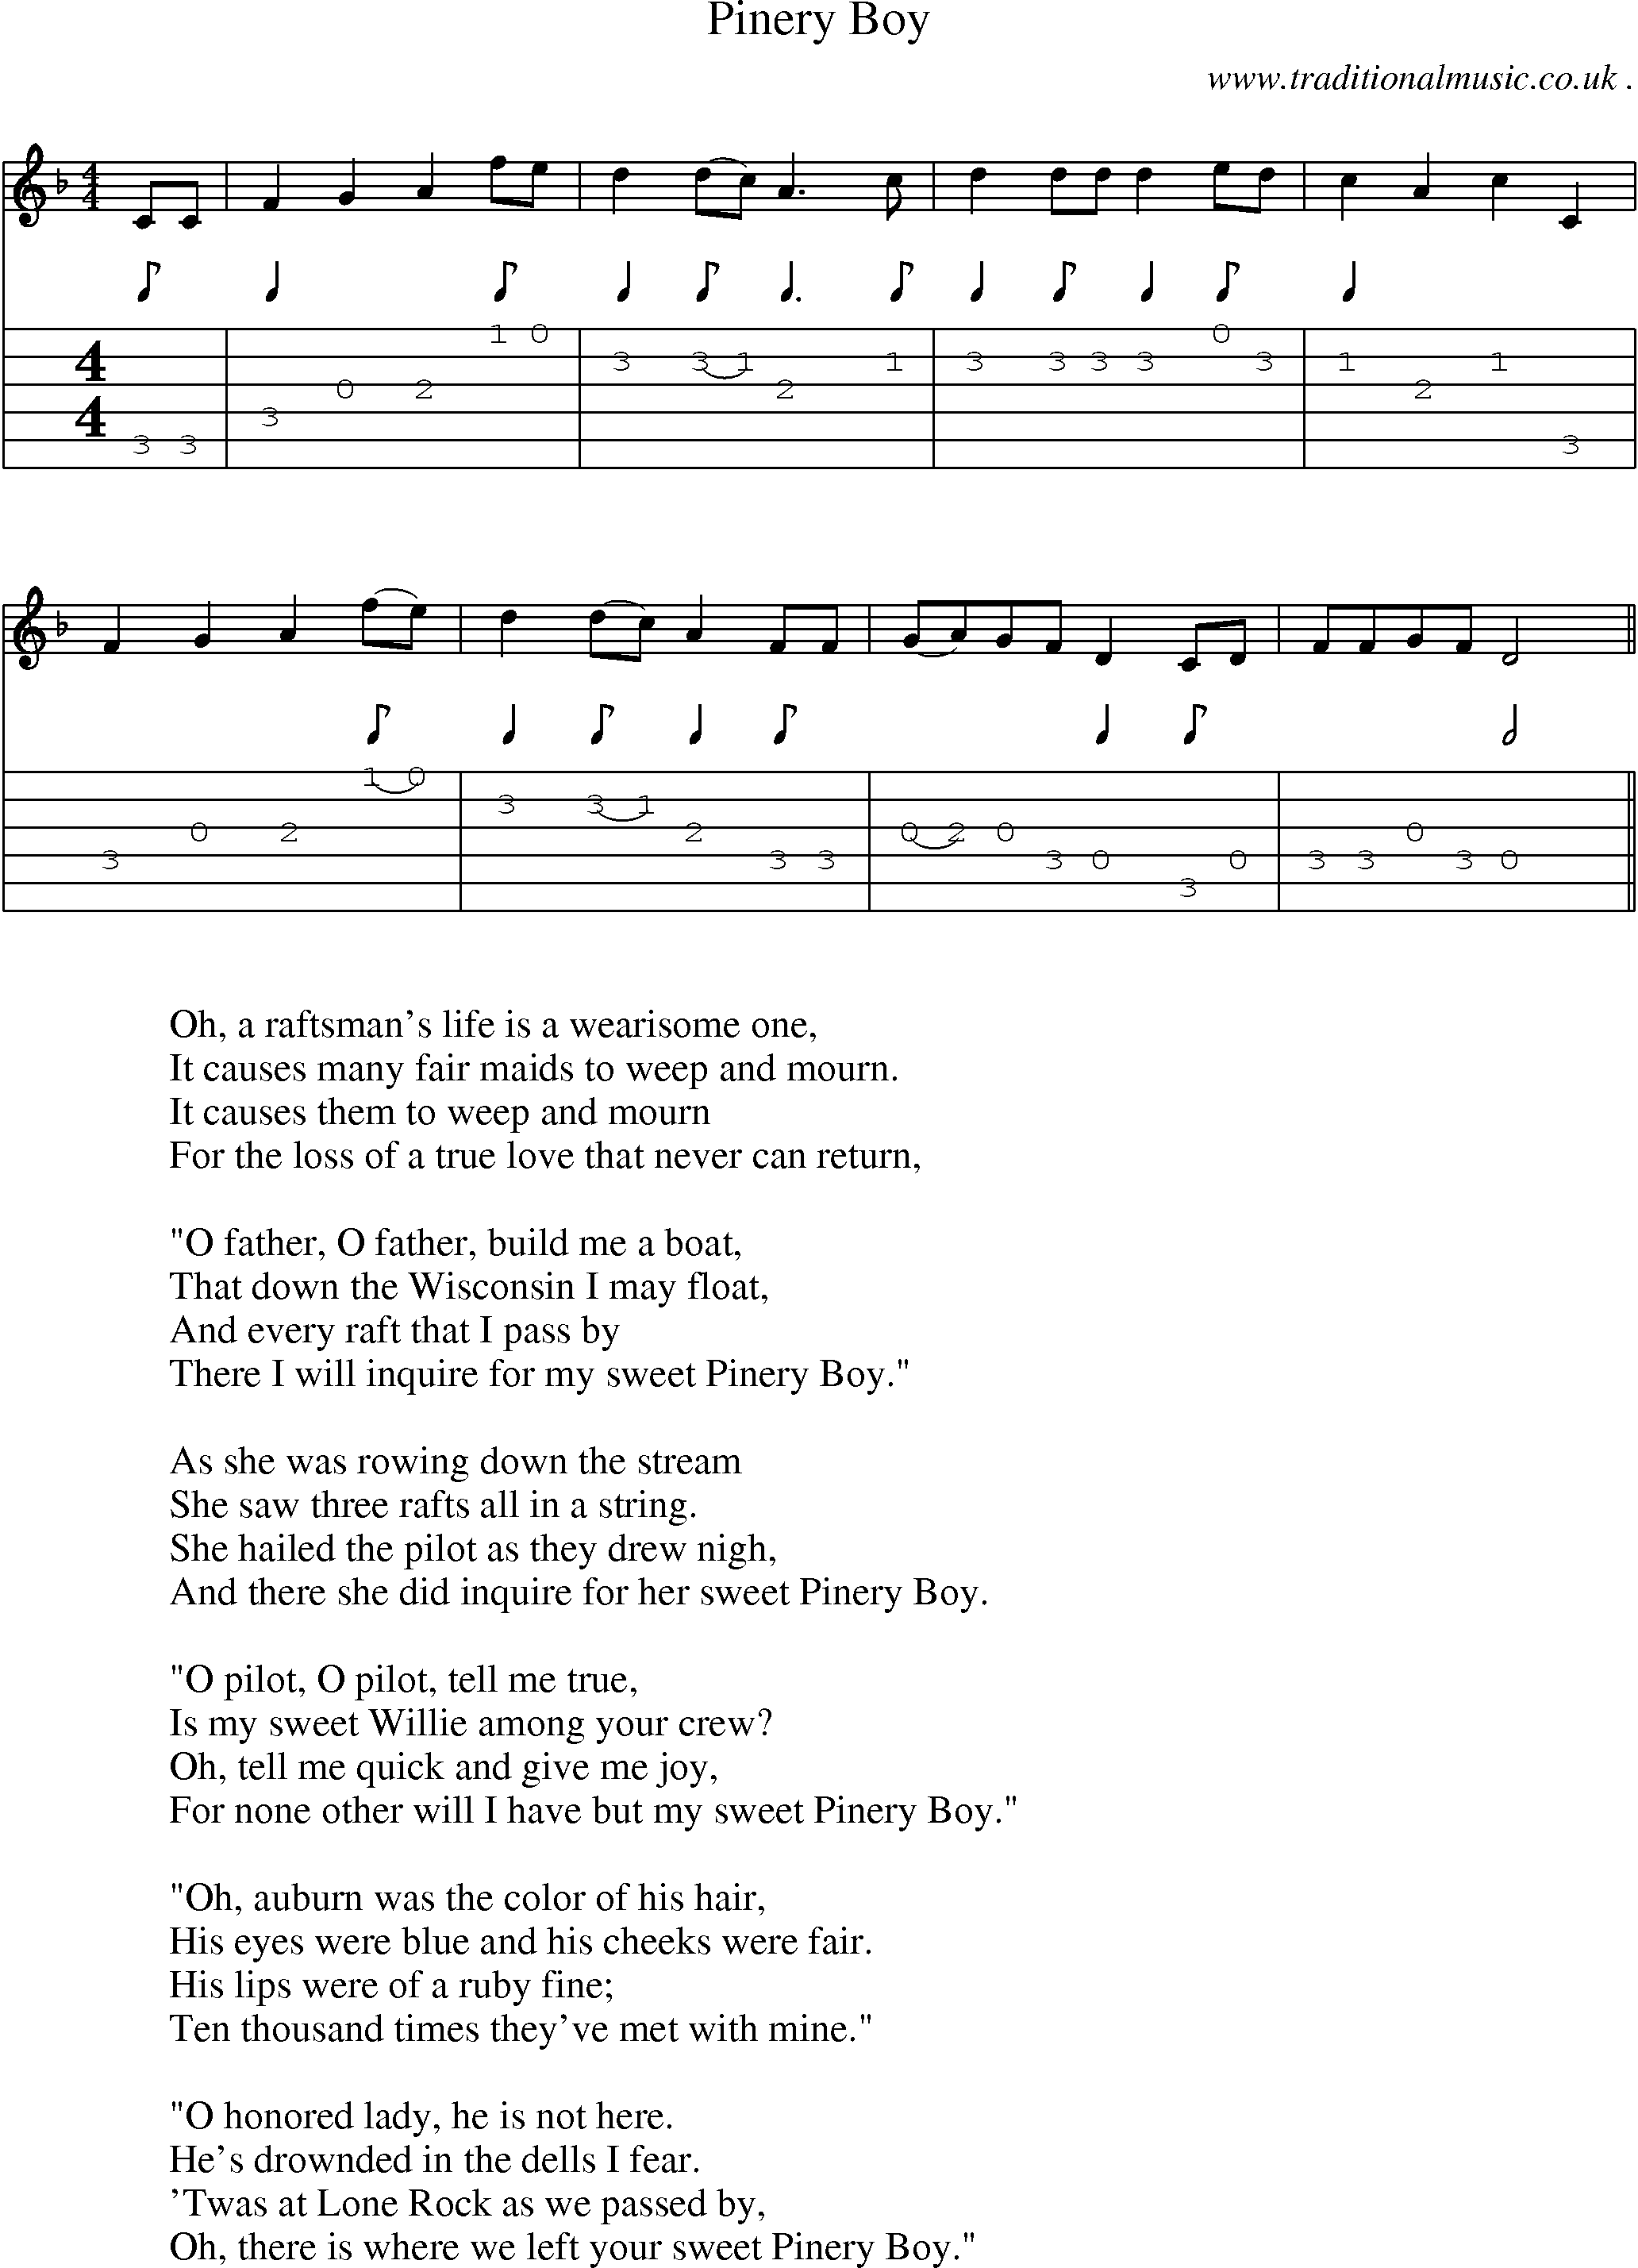 Music Score and Guitar Tabs for Pinery Boy